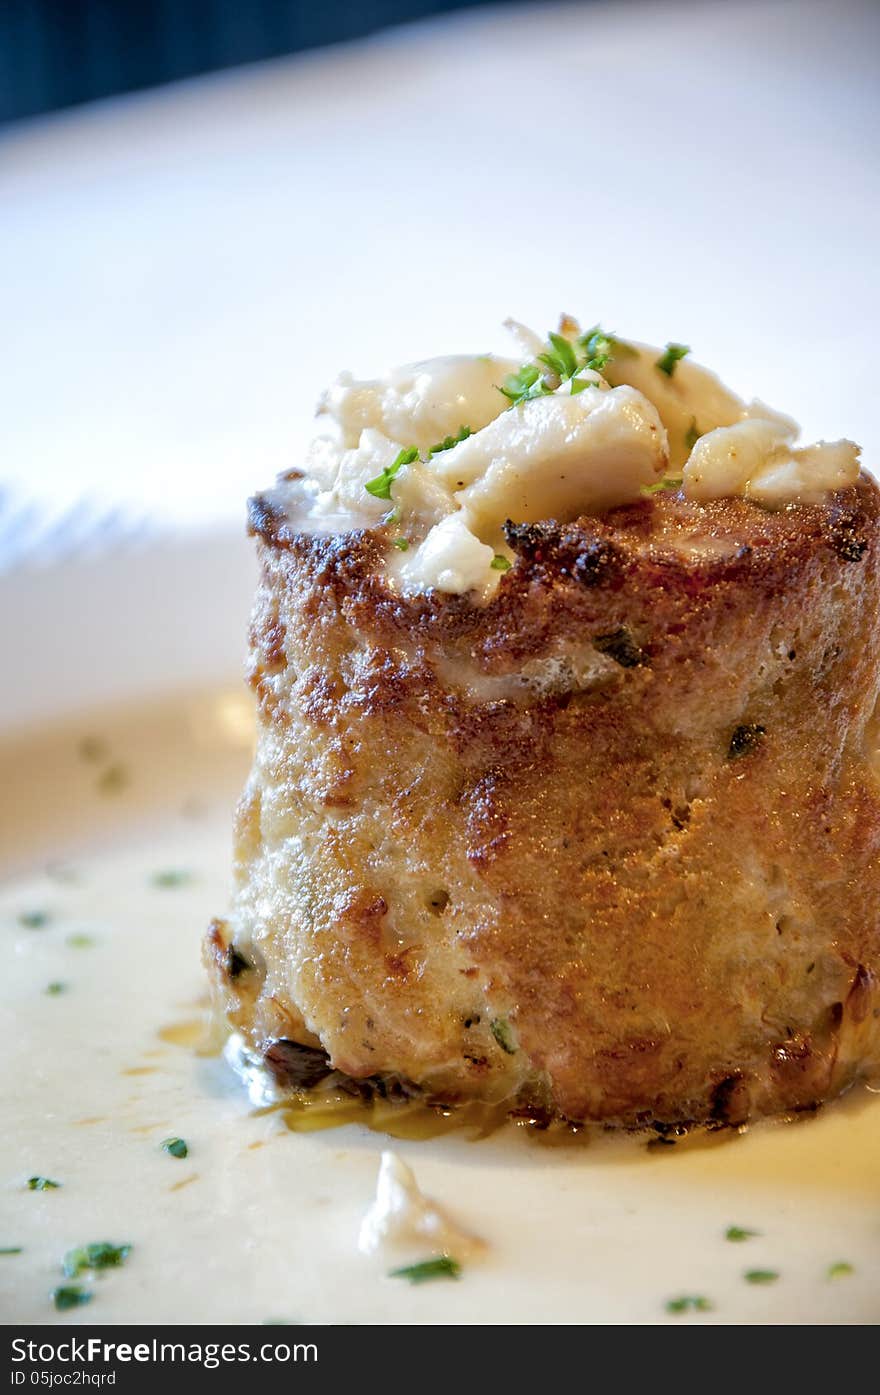 This is a off center, close up picture of a crab cake with bits of crab on top.